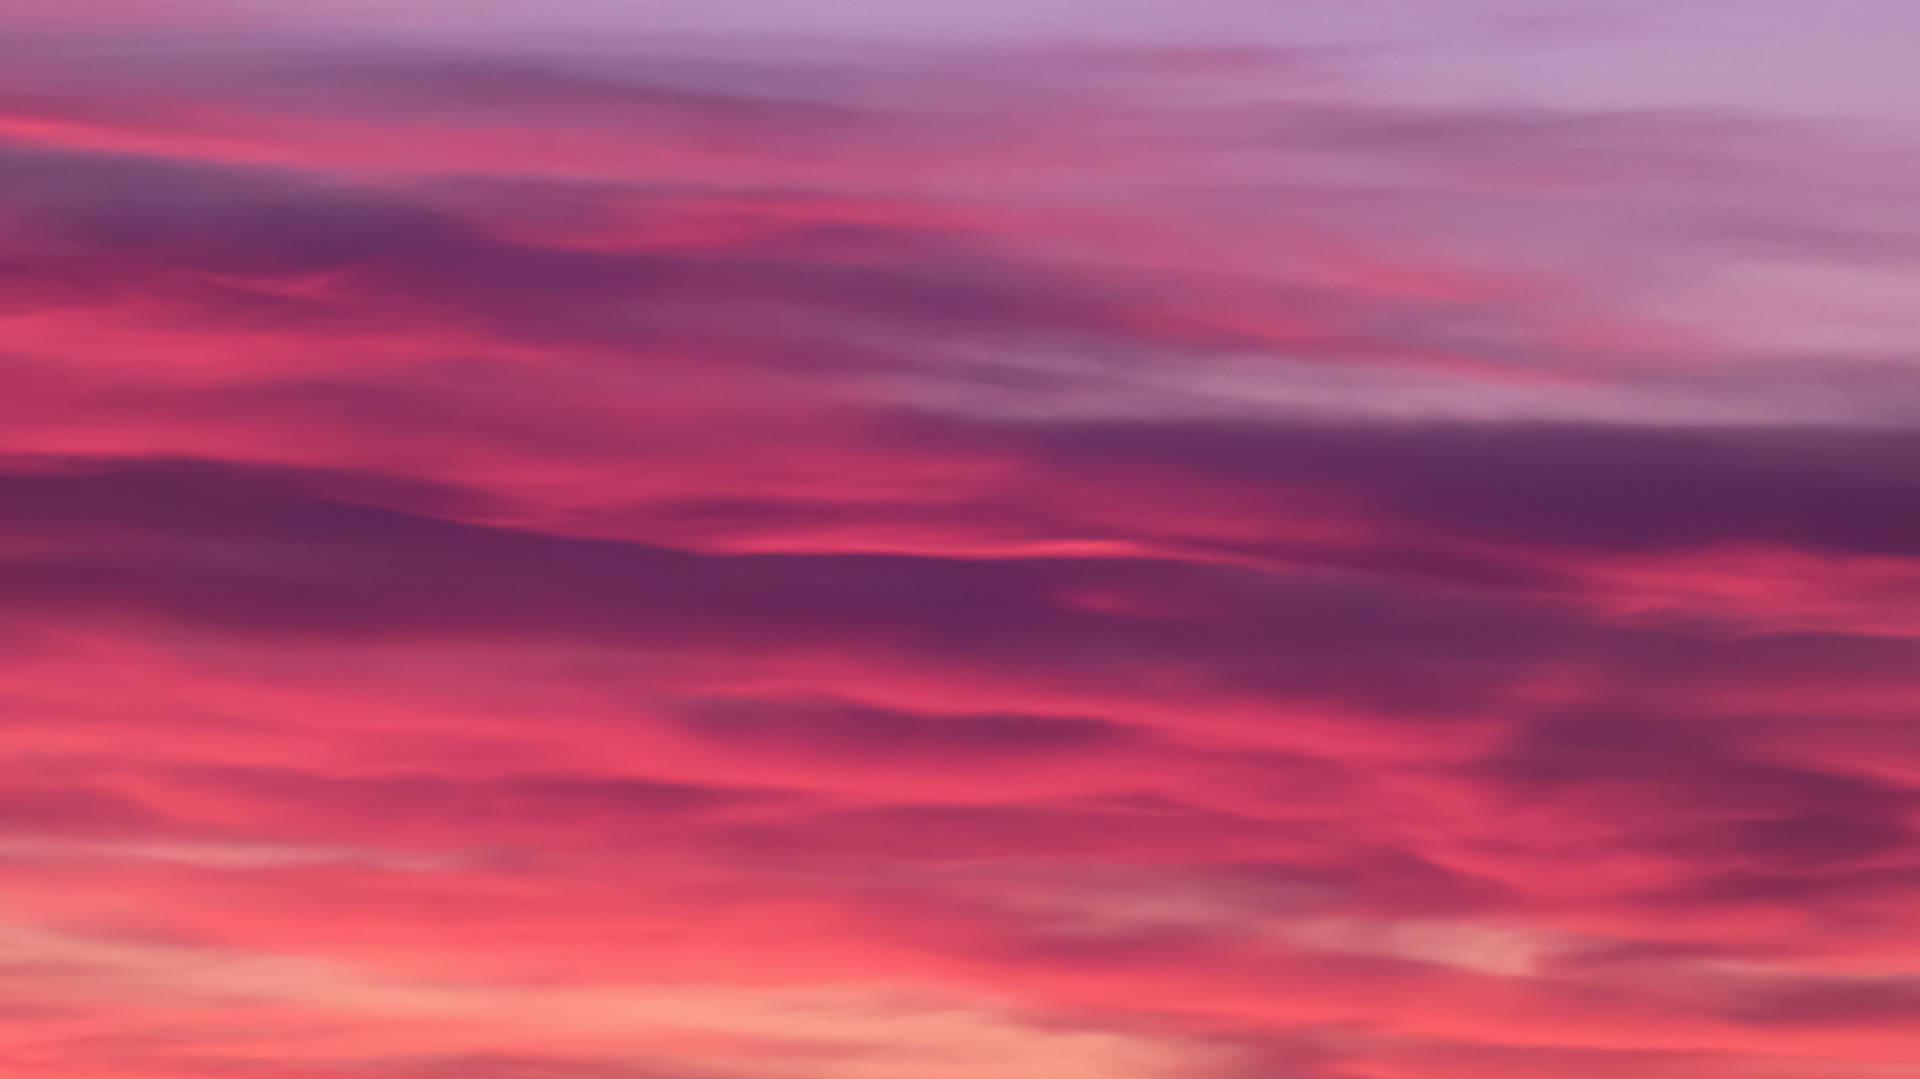 Take A Moment To Admire The Beautiful Ombre Sky Background